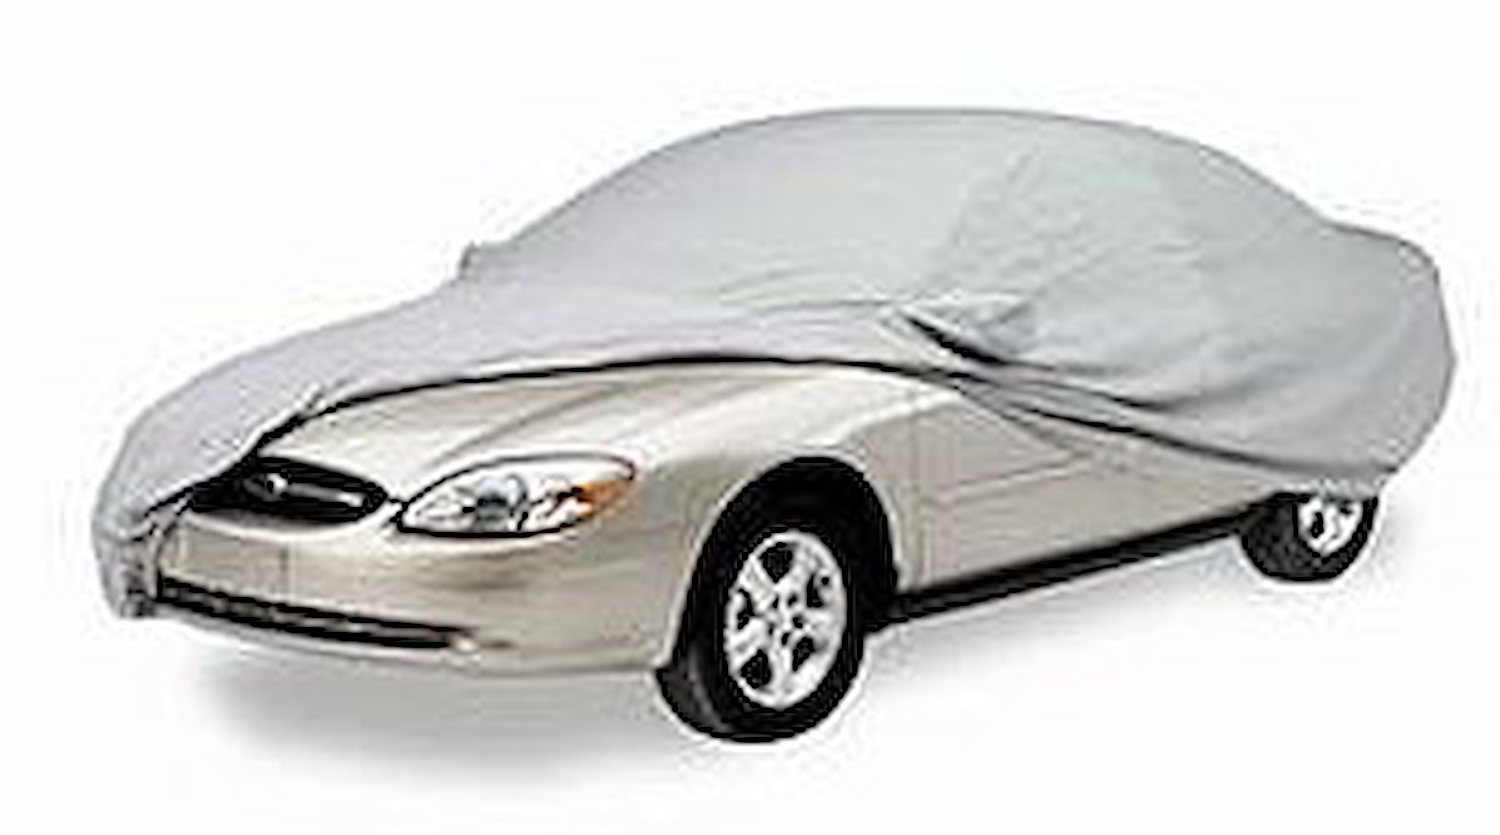 Polycotton Indoor Car Cover Fits Ford Mustangs